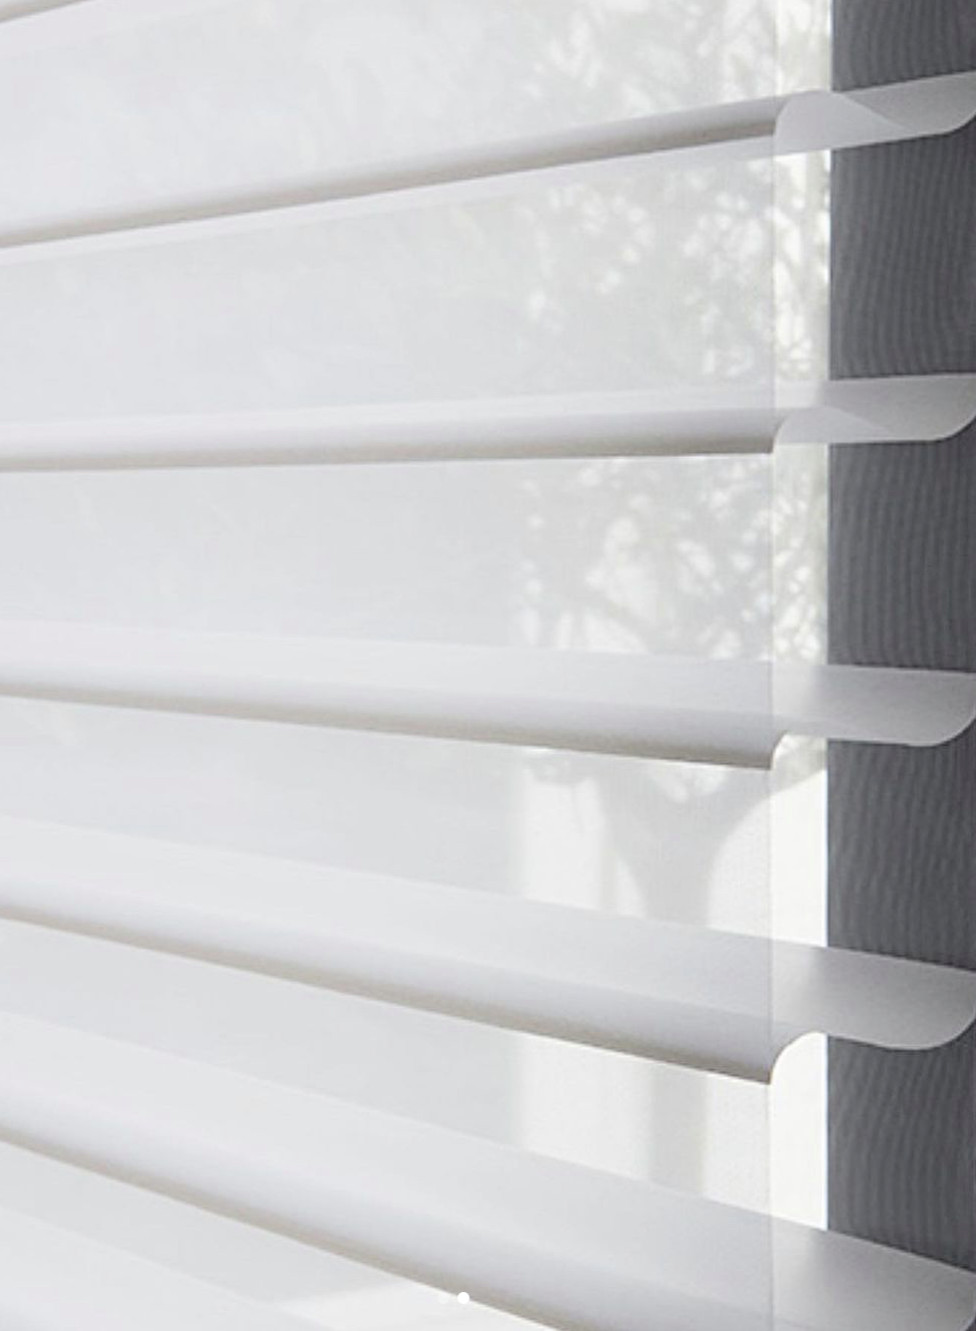 DAY & NIGHT BLINDS